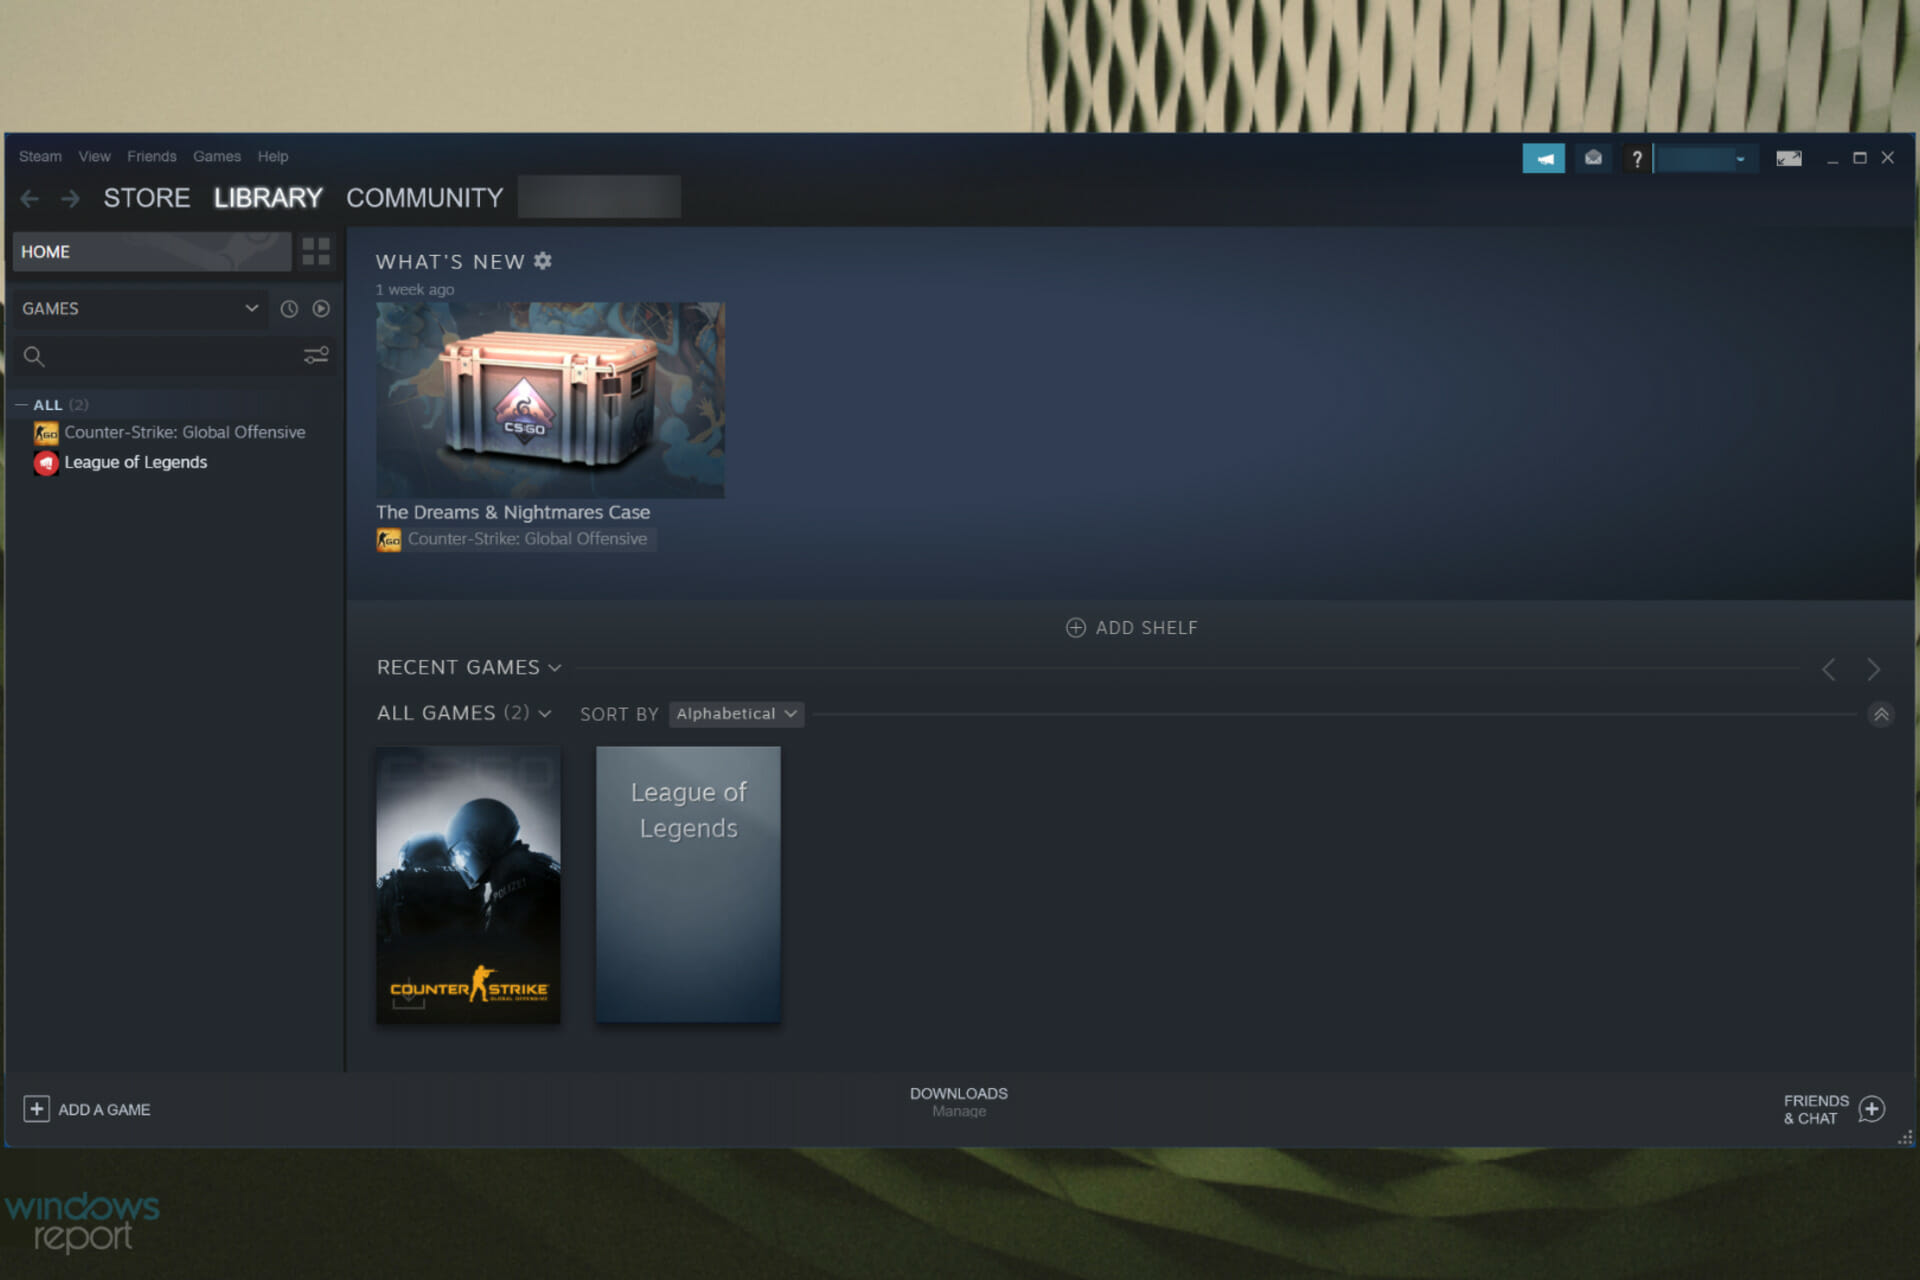 How To Install Steam On Windows PC or Laptop [2022] 